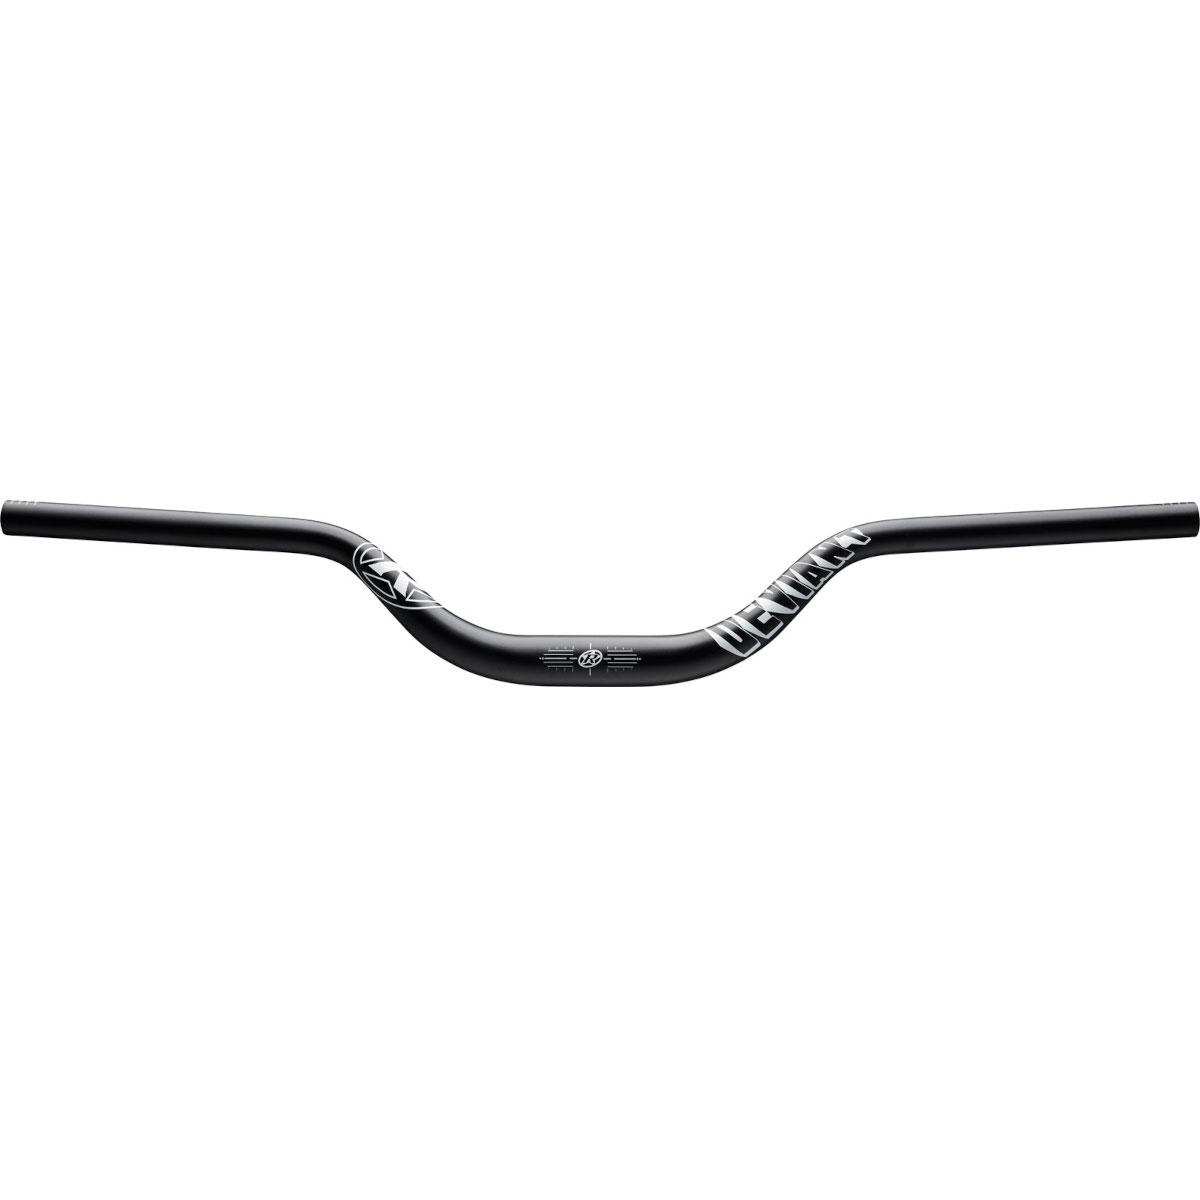 Picture of Reverse Components Deviant 31.8 Trial Handlebar - 730mm - black / white